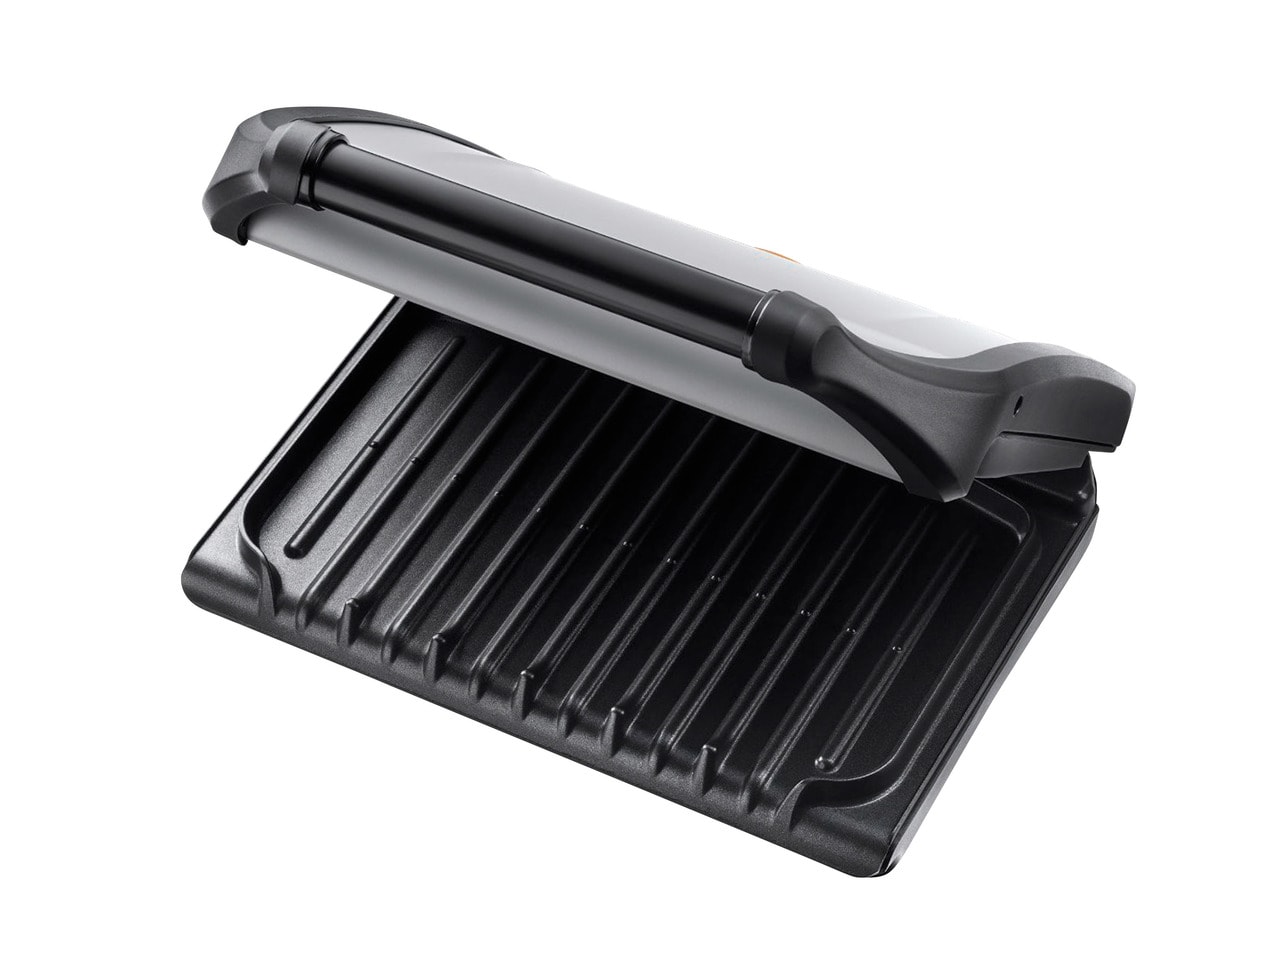 George Foreman 5 Portion Family Grill1